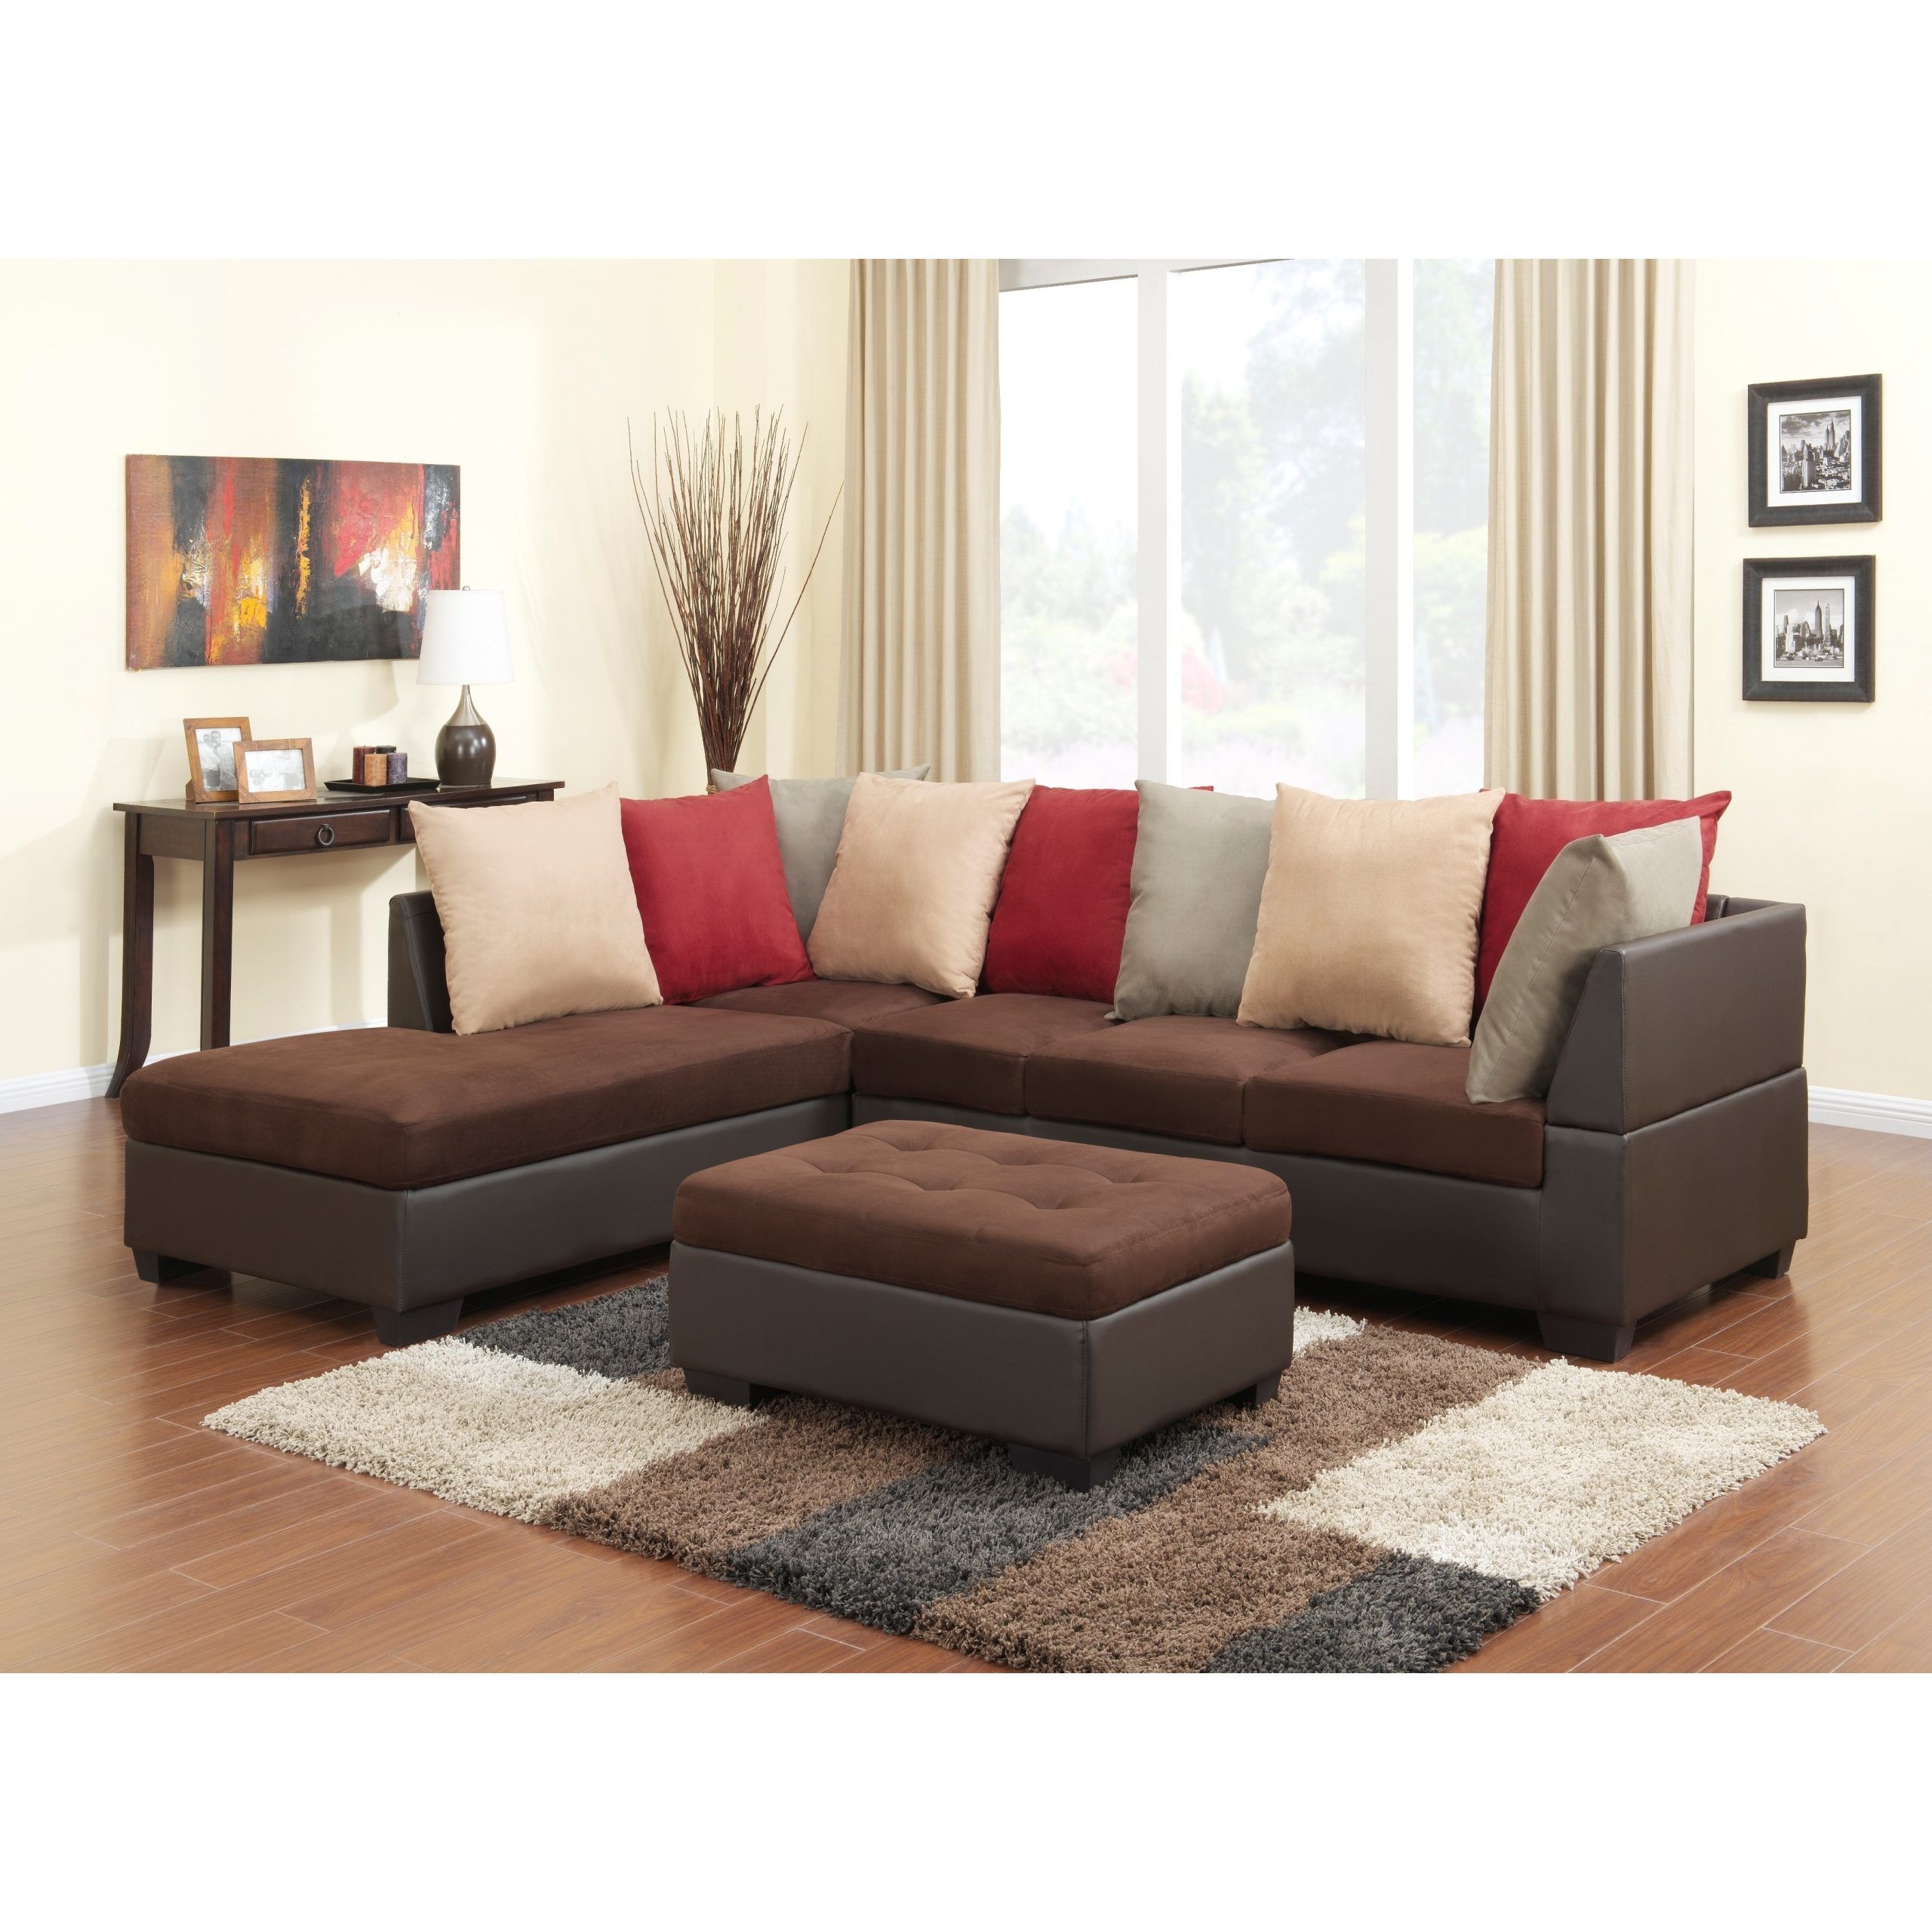 Microfiber Sectional Sofa With Scatter Back Pillows – Overstock Intended For Microfiber Sectional Corner Sofas (View 15 of 20)